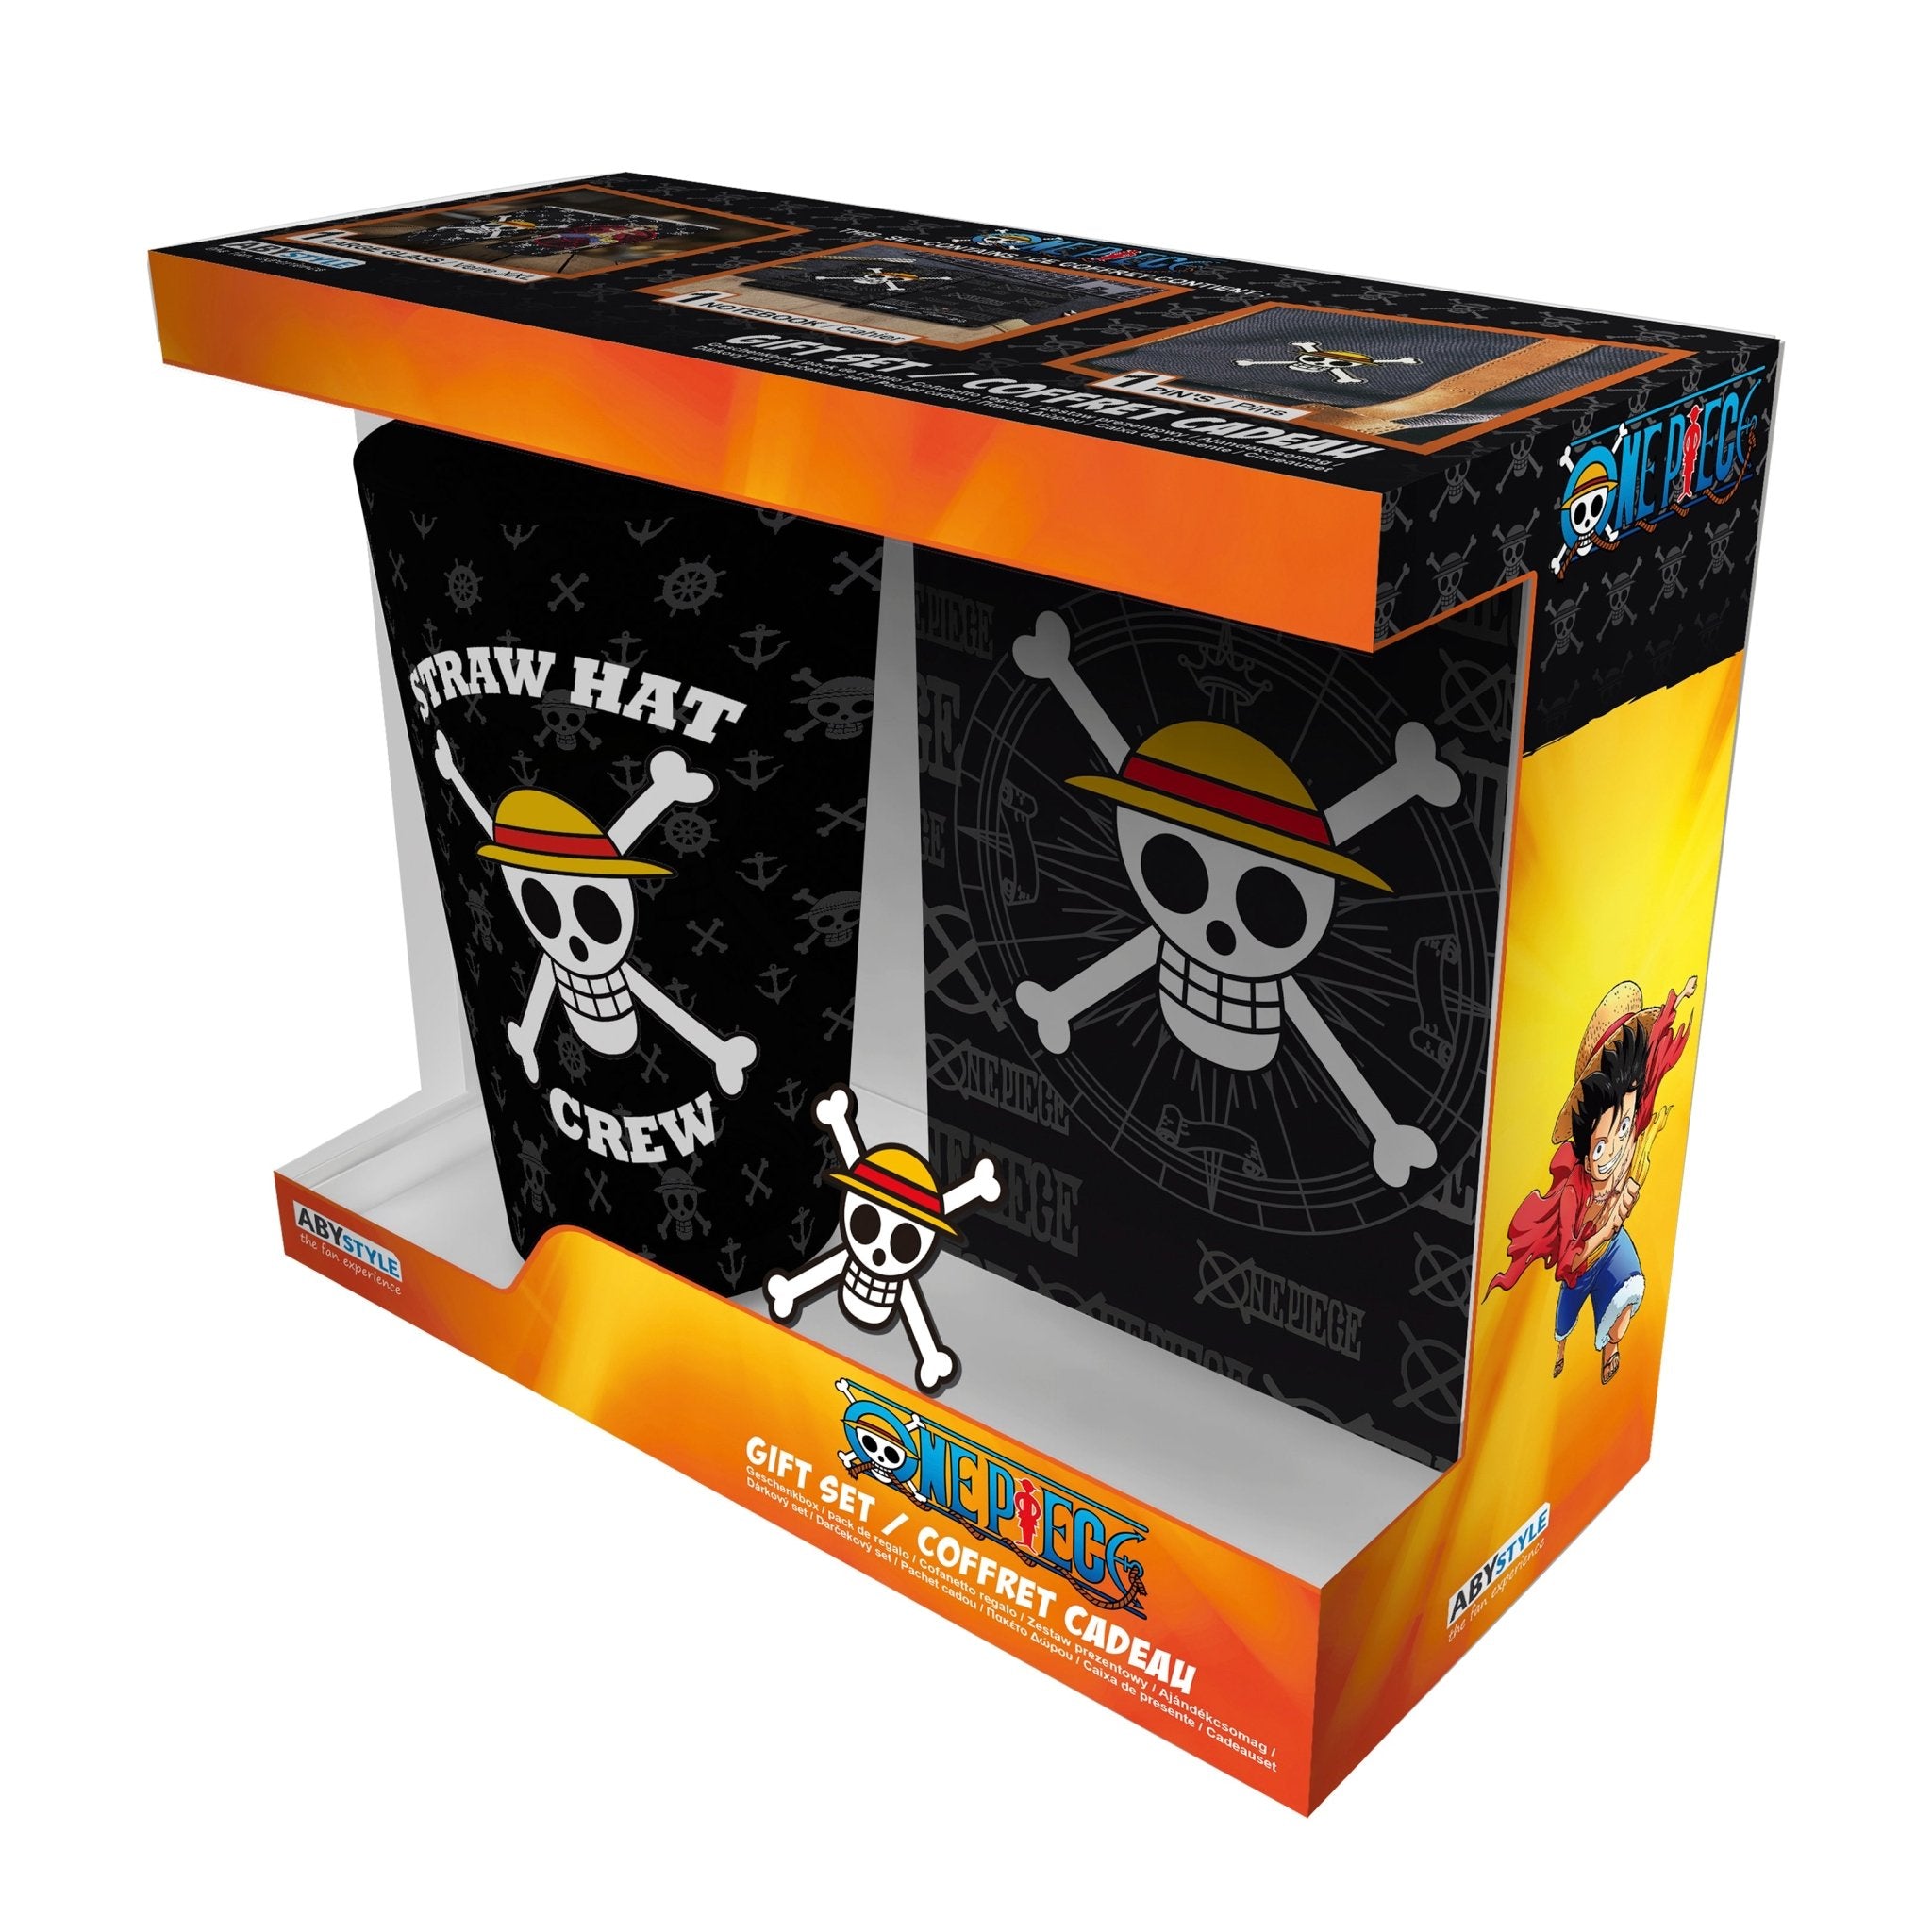 https://cdn.shopify.com/s/files/1/0586/3551/8122/products/one-piece-straw-hat-jolly-roger-crew-mug-notepad-pin-gift-set-abypck197-us-967256.jpg?v=1694496778&width=2048